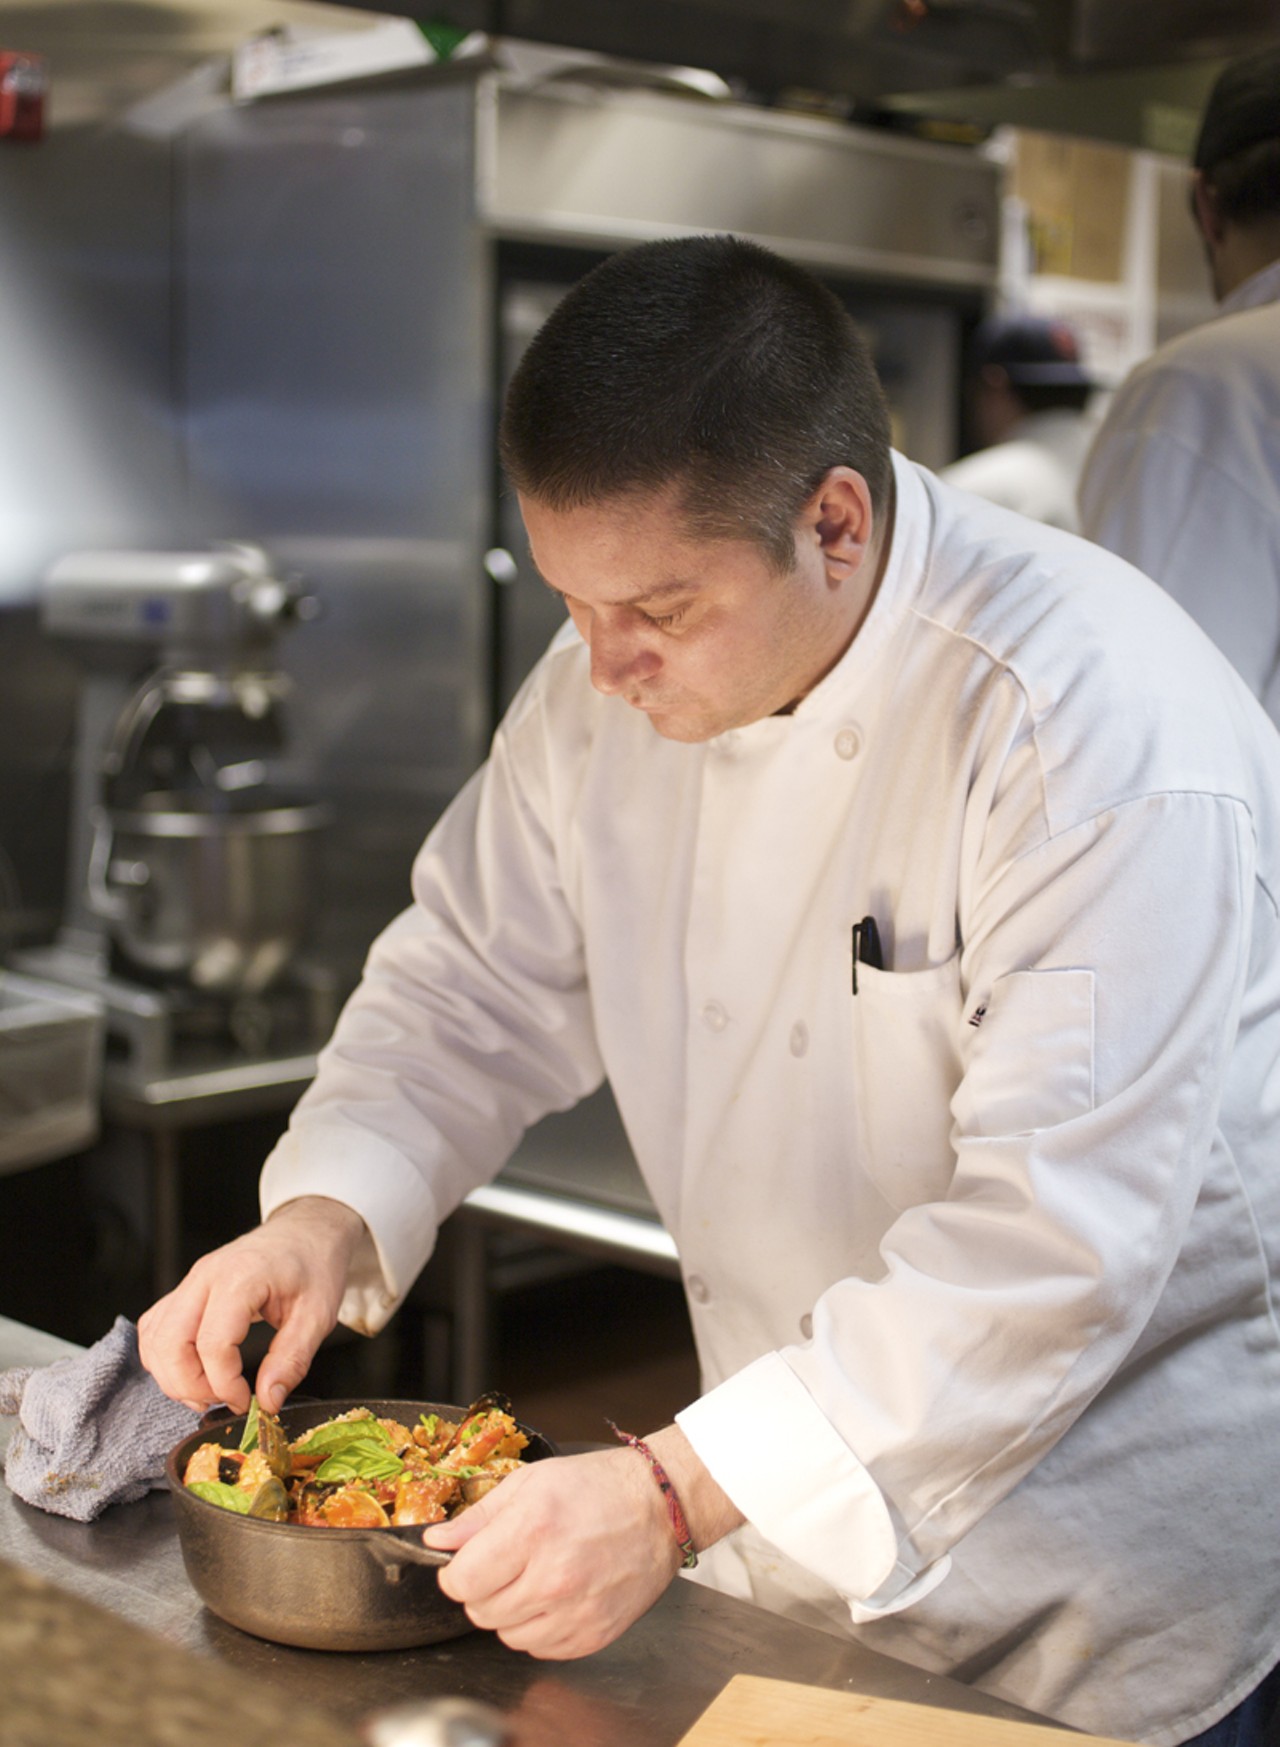 Owner and Executive Chef Justin Haifley preparing the Fisherman's Stew.